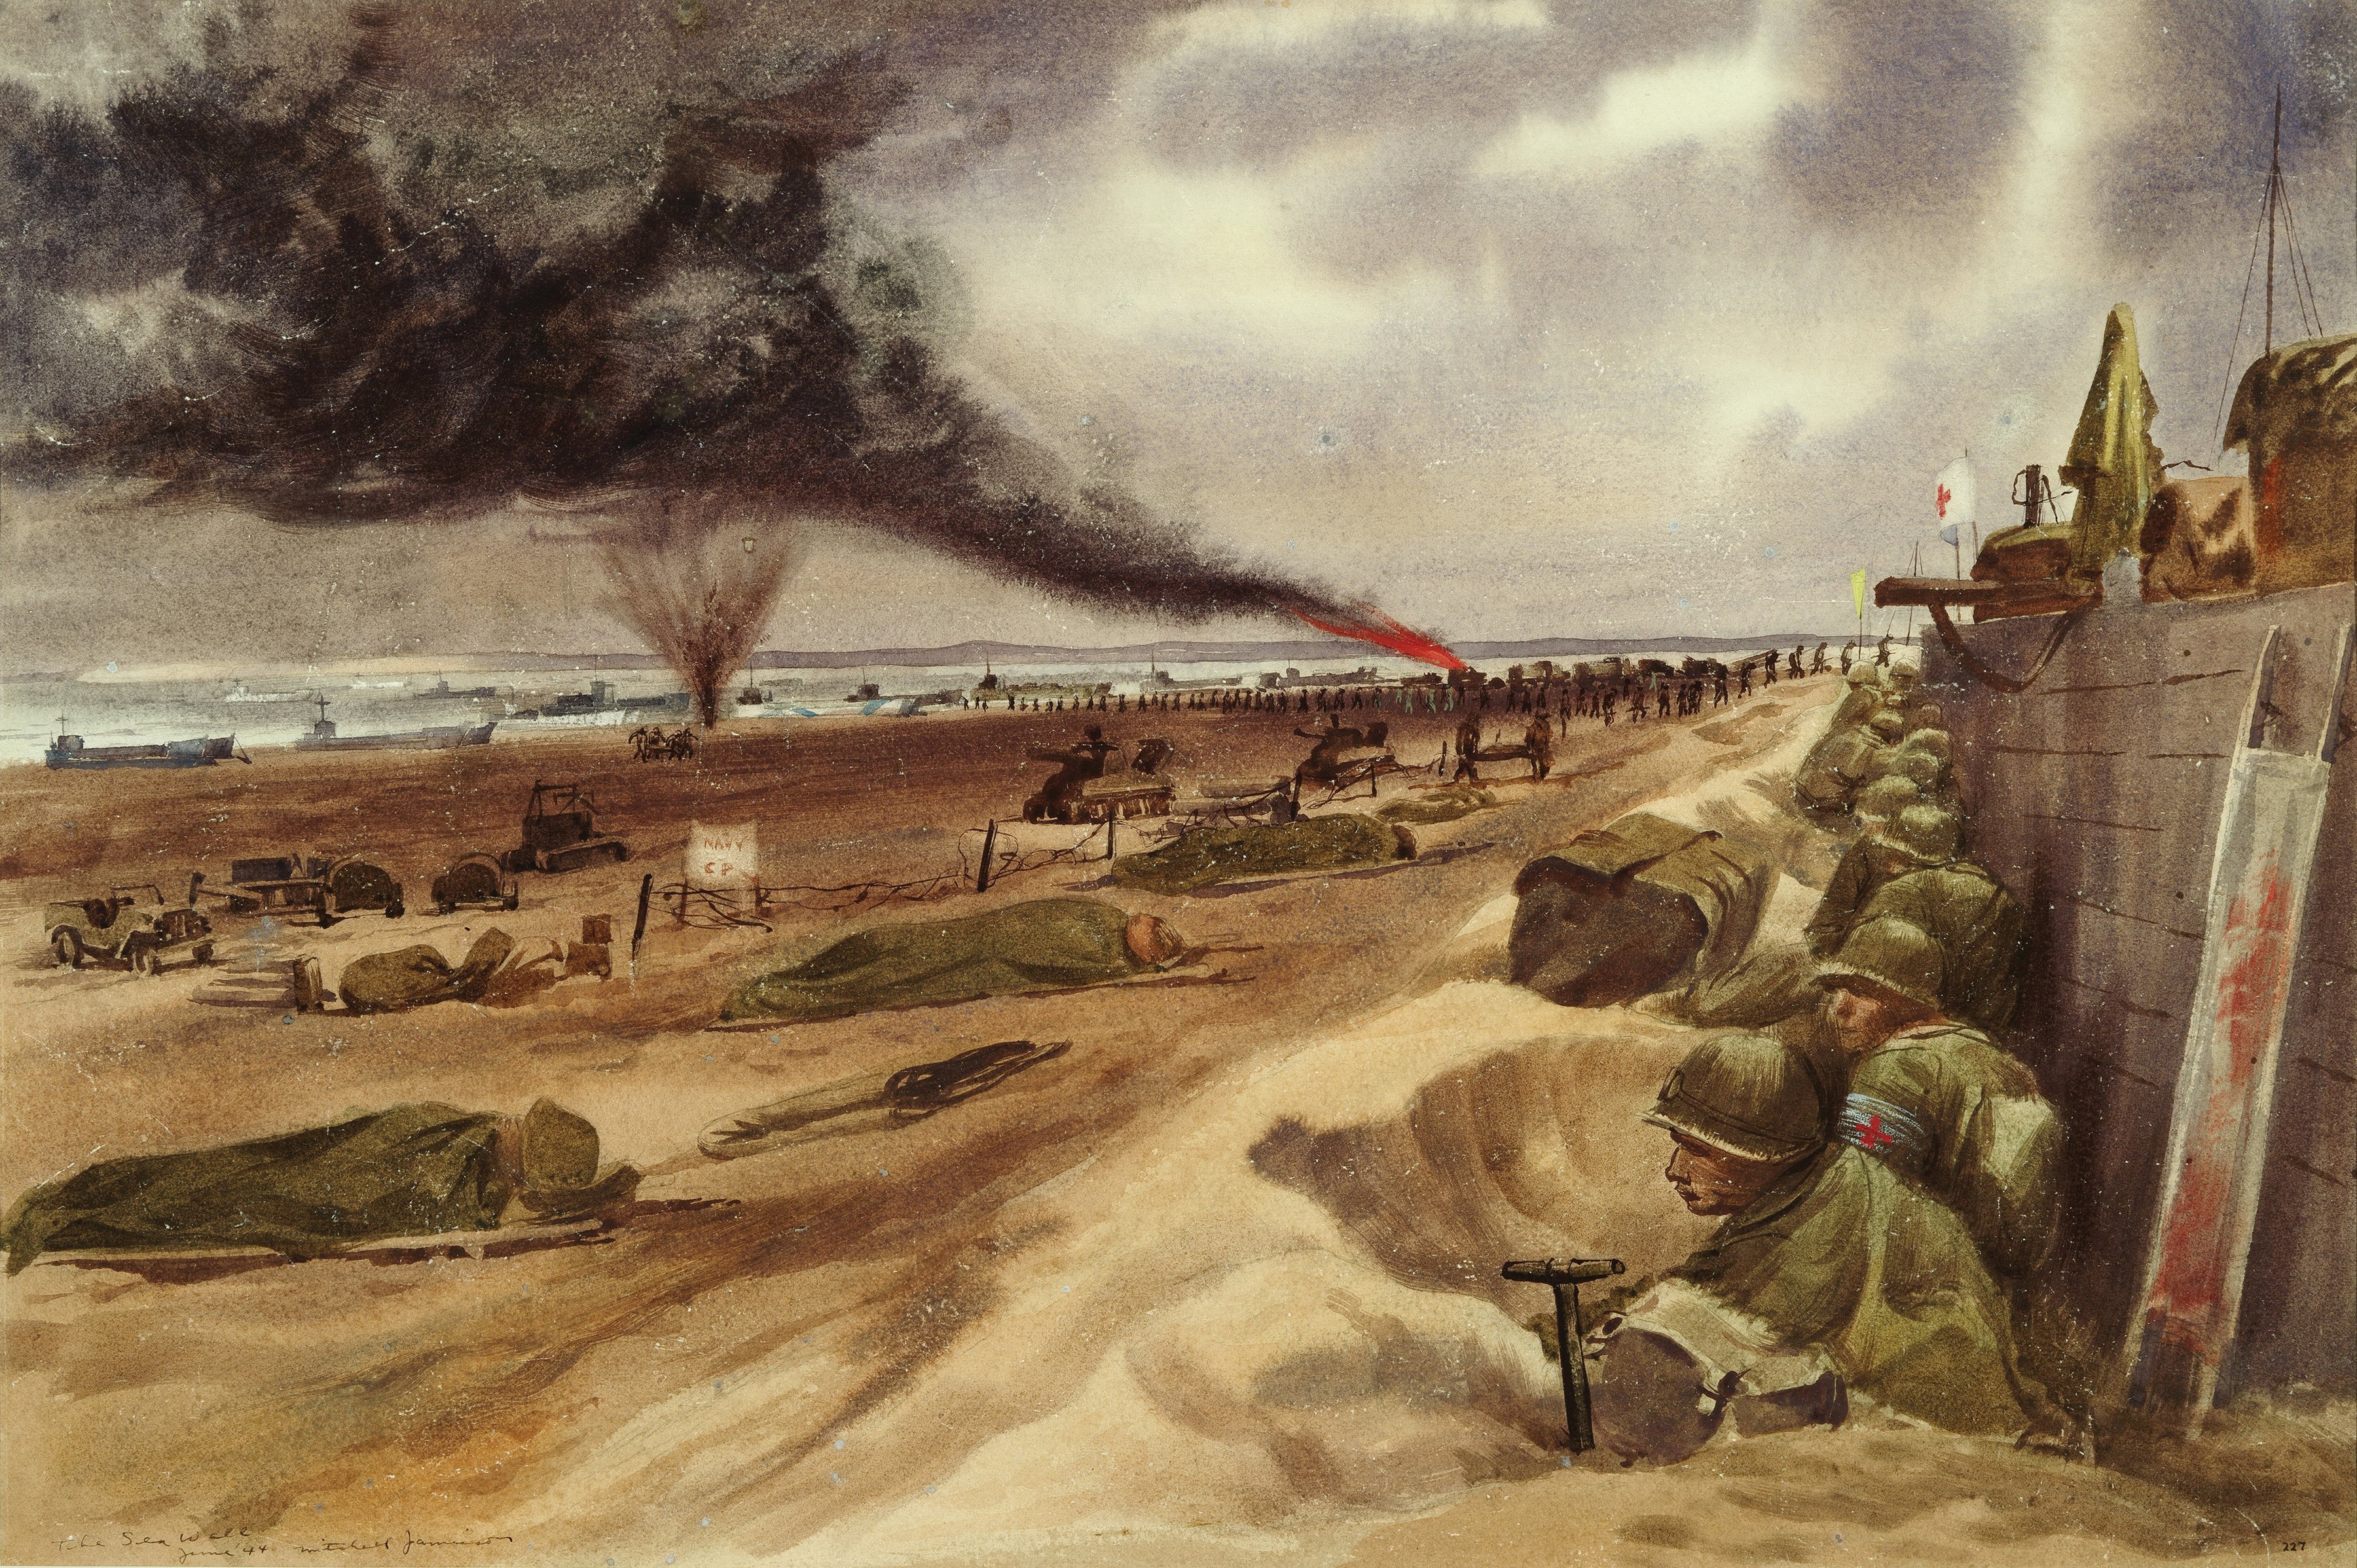 Why D-Day Was So Important to Allied Victory